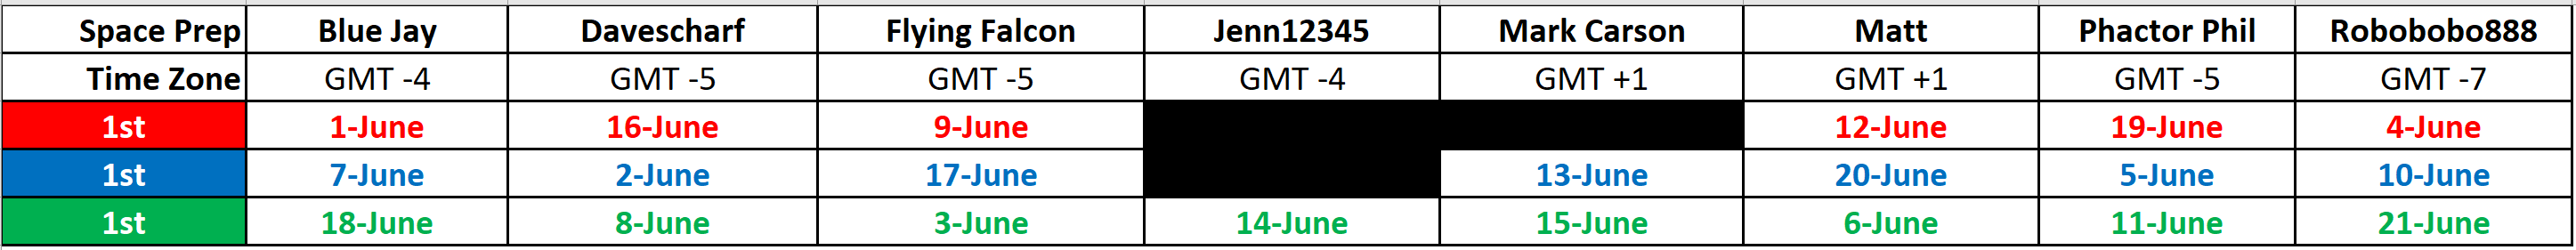 PL Group June.gif